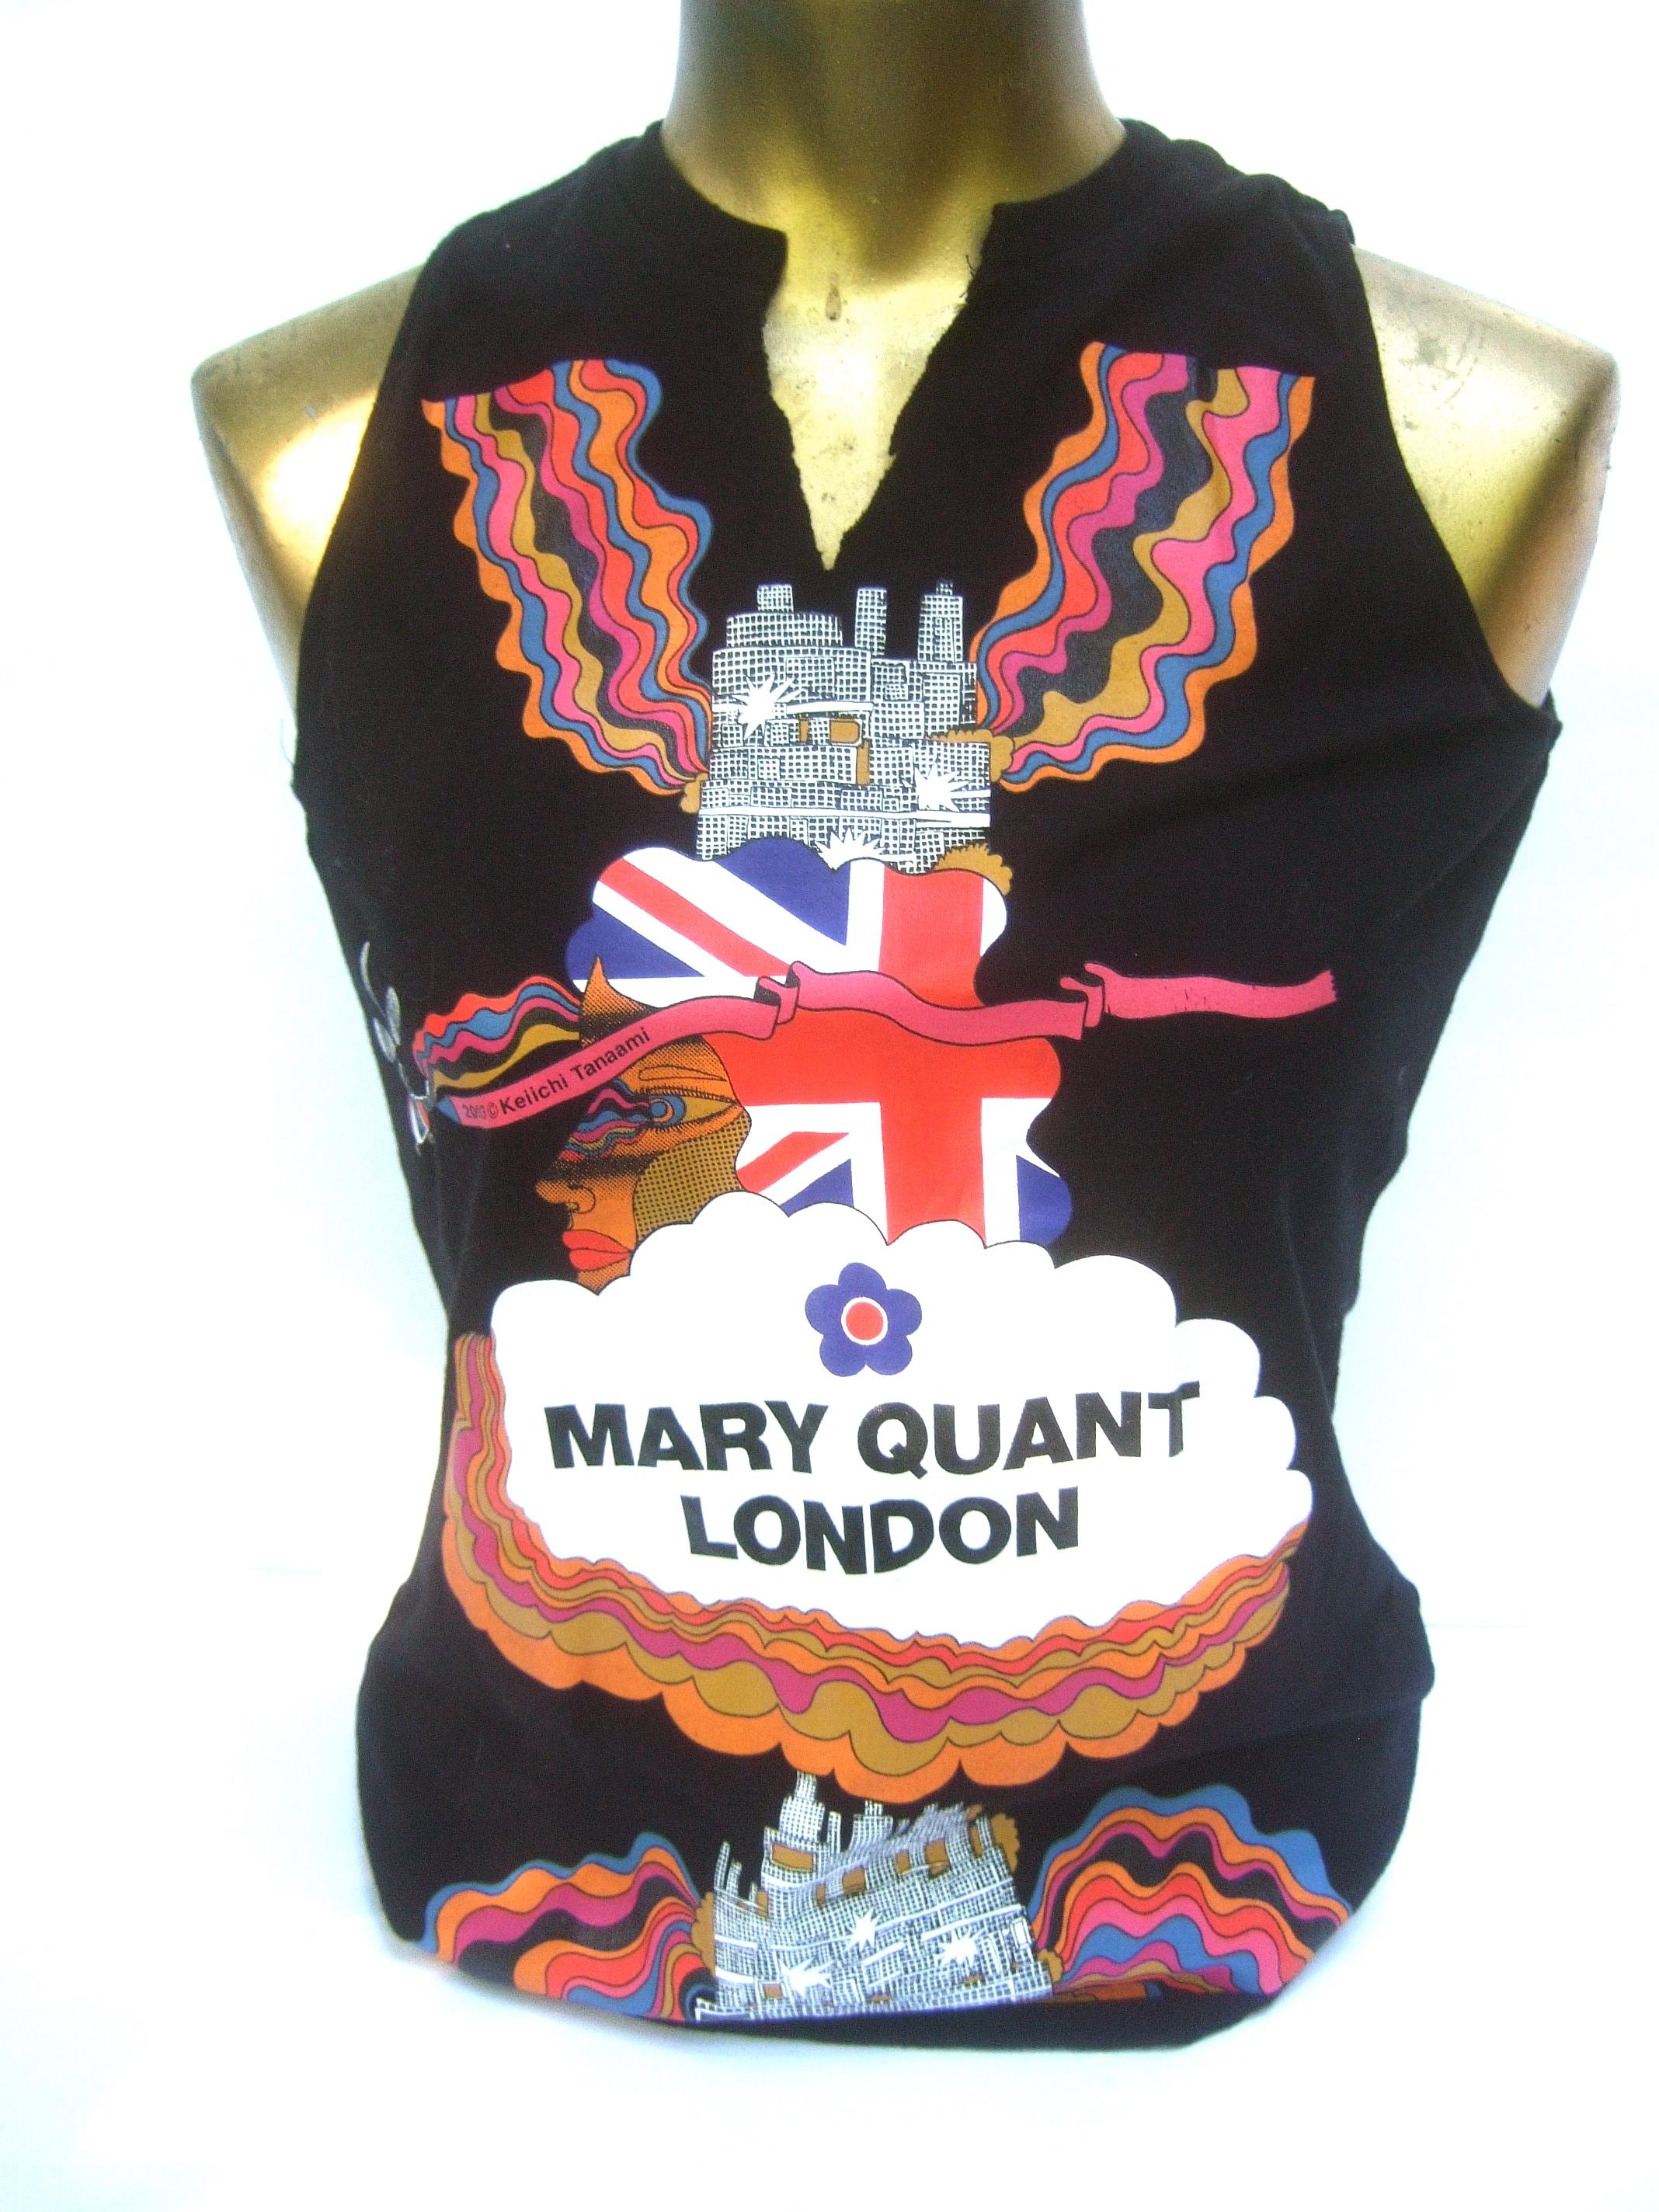 Mary Quant London black sleeveless cotton t-shirt top circa 2003
The silkscreen cotton top is illustrated with bold graphics
reminiscent of Peter Max; illuminated against a solid black
background

The center neckline has an intentional jagged street